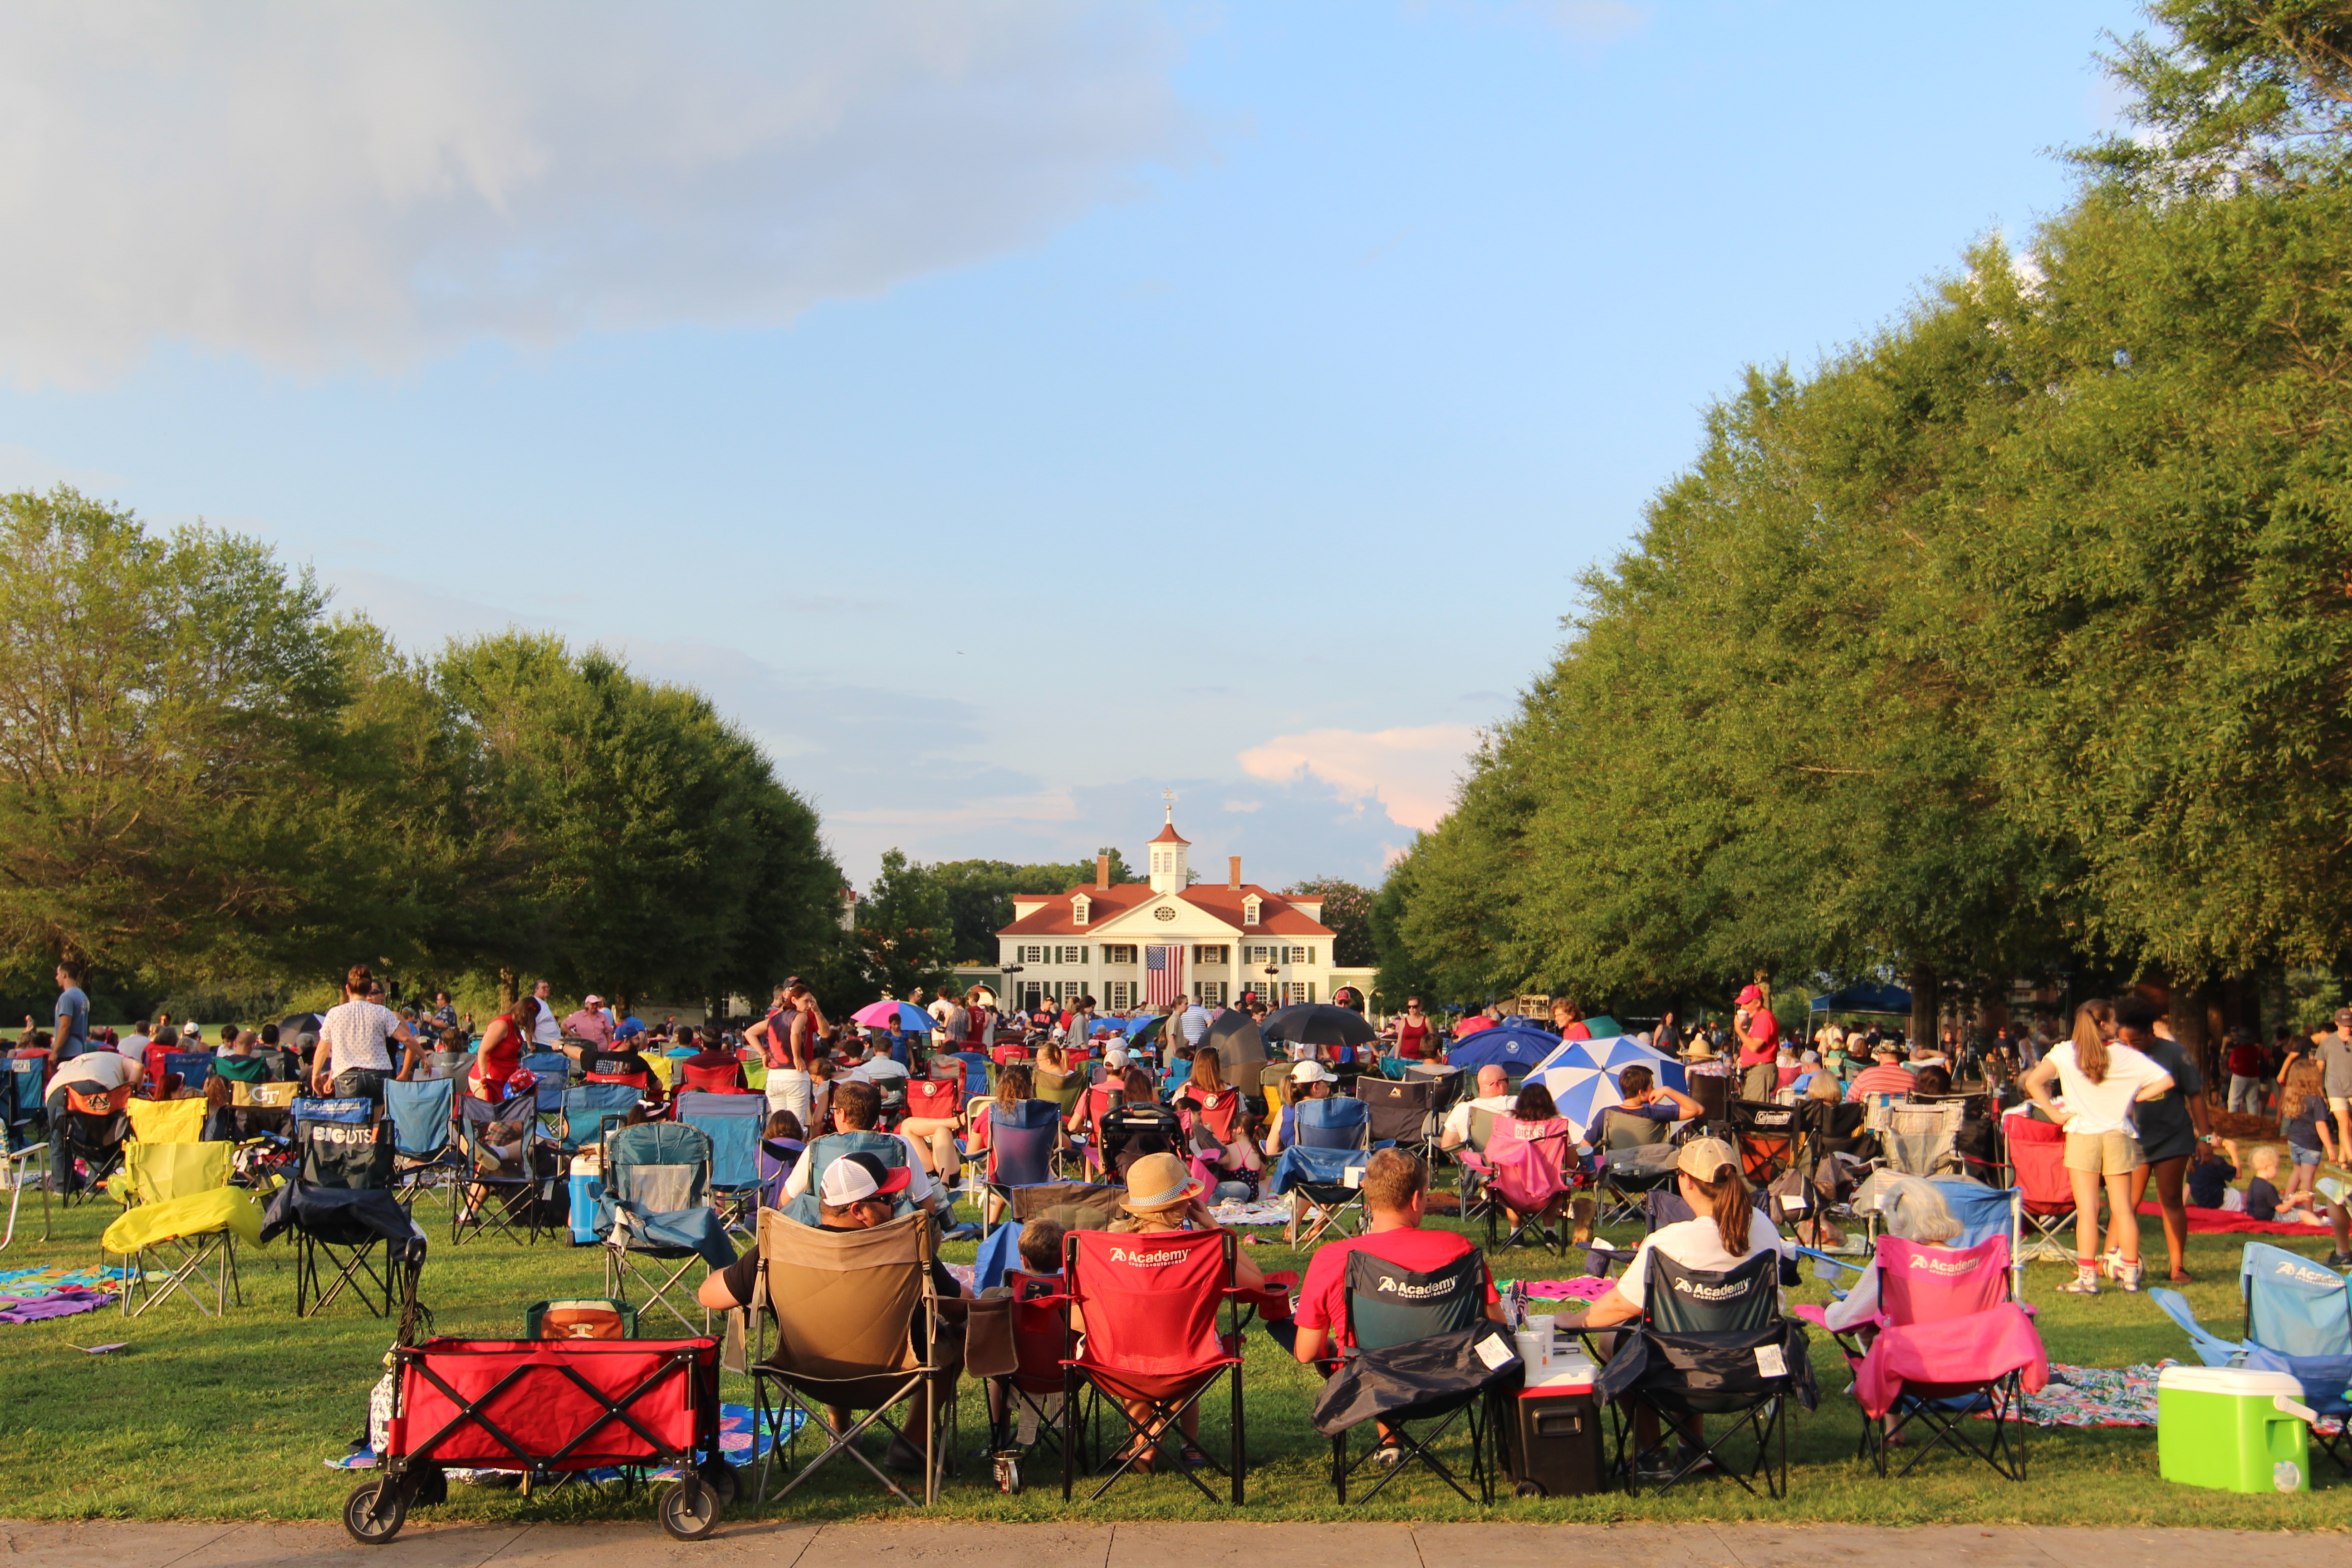 Celebrate Independence Day in a 1776 setting at American Village